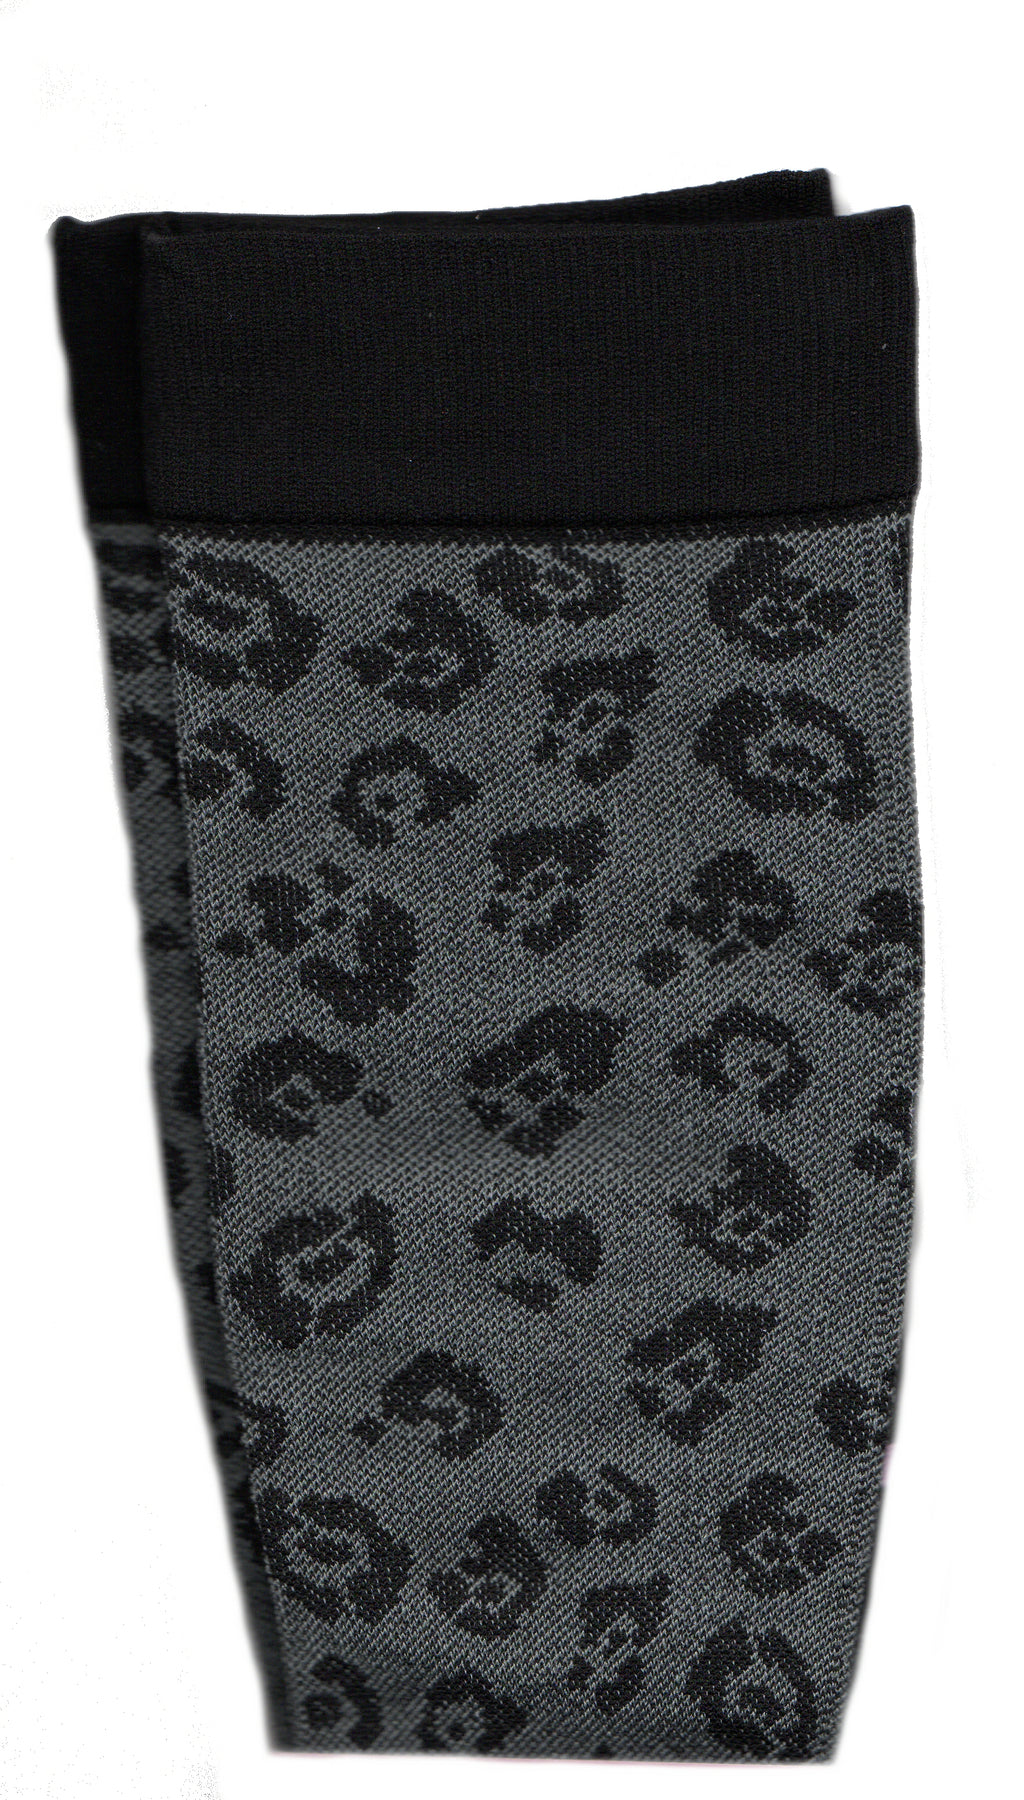 This is a Leopard Sock with a Grey background and has a Black Leopard Print over it. The Cuffs, Heels and Toes are Black.